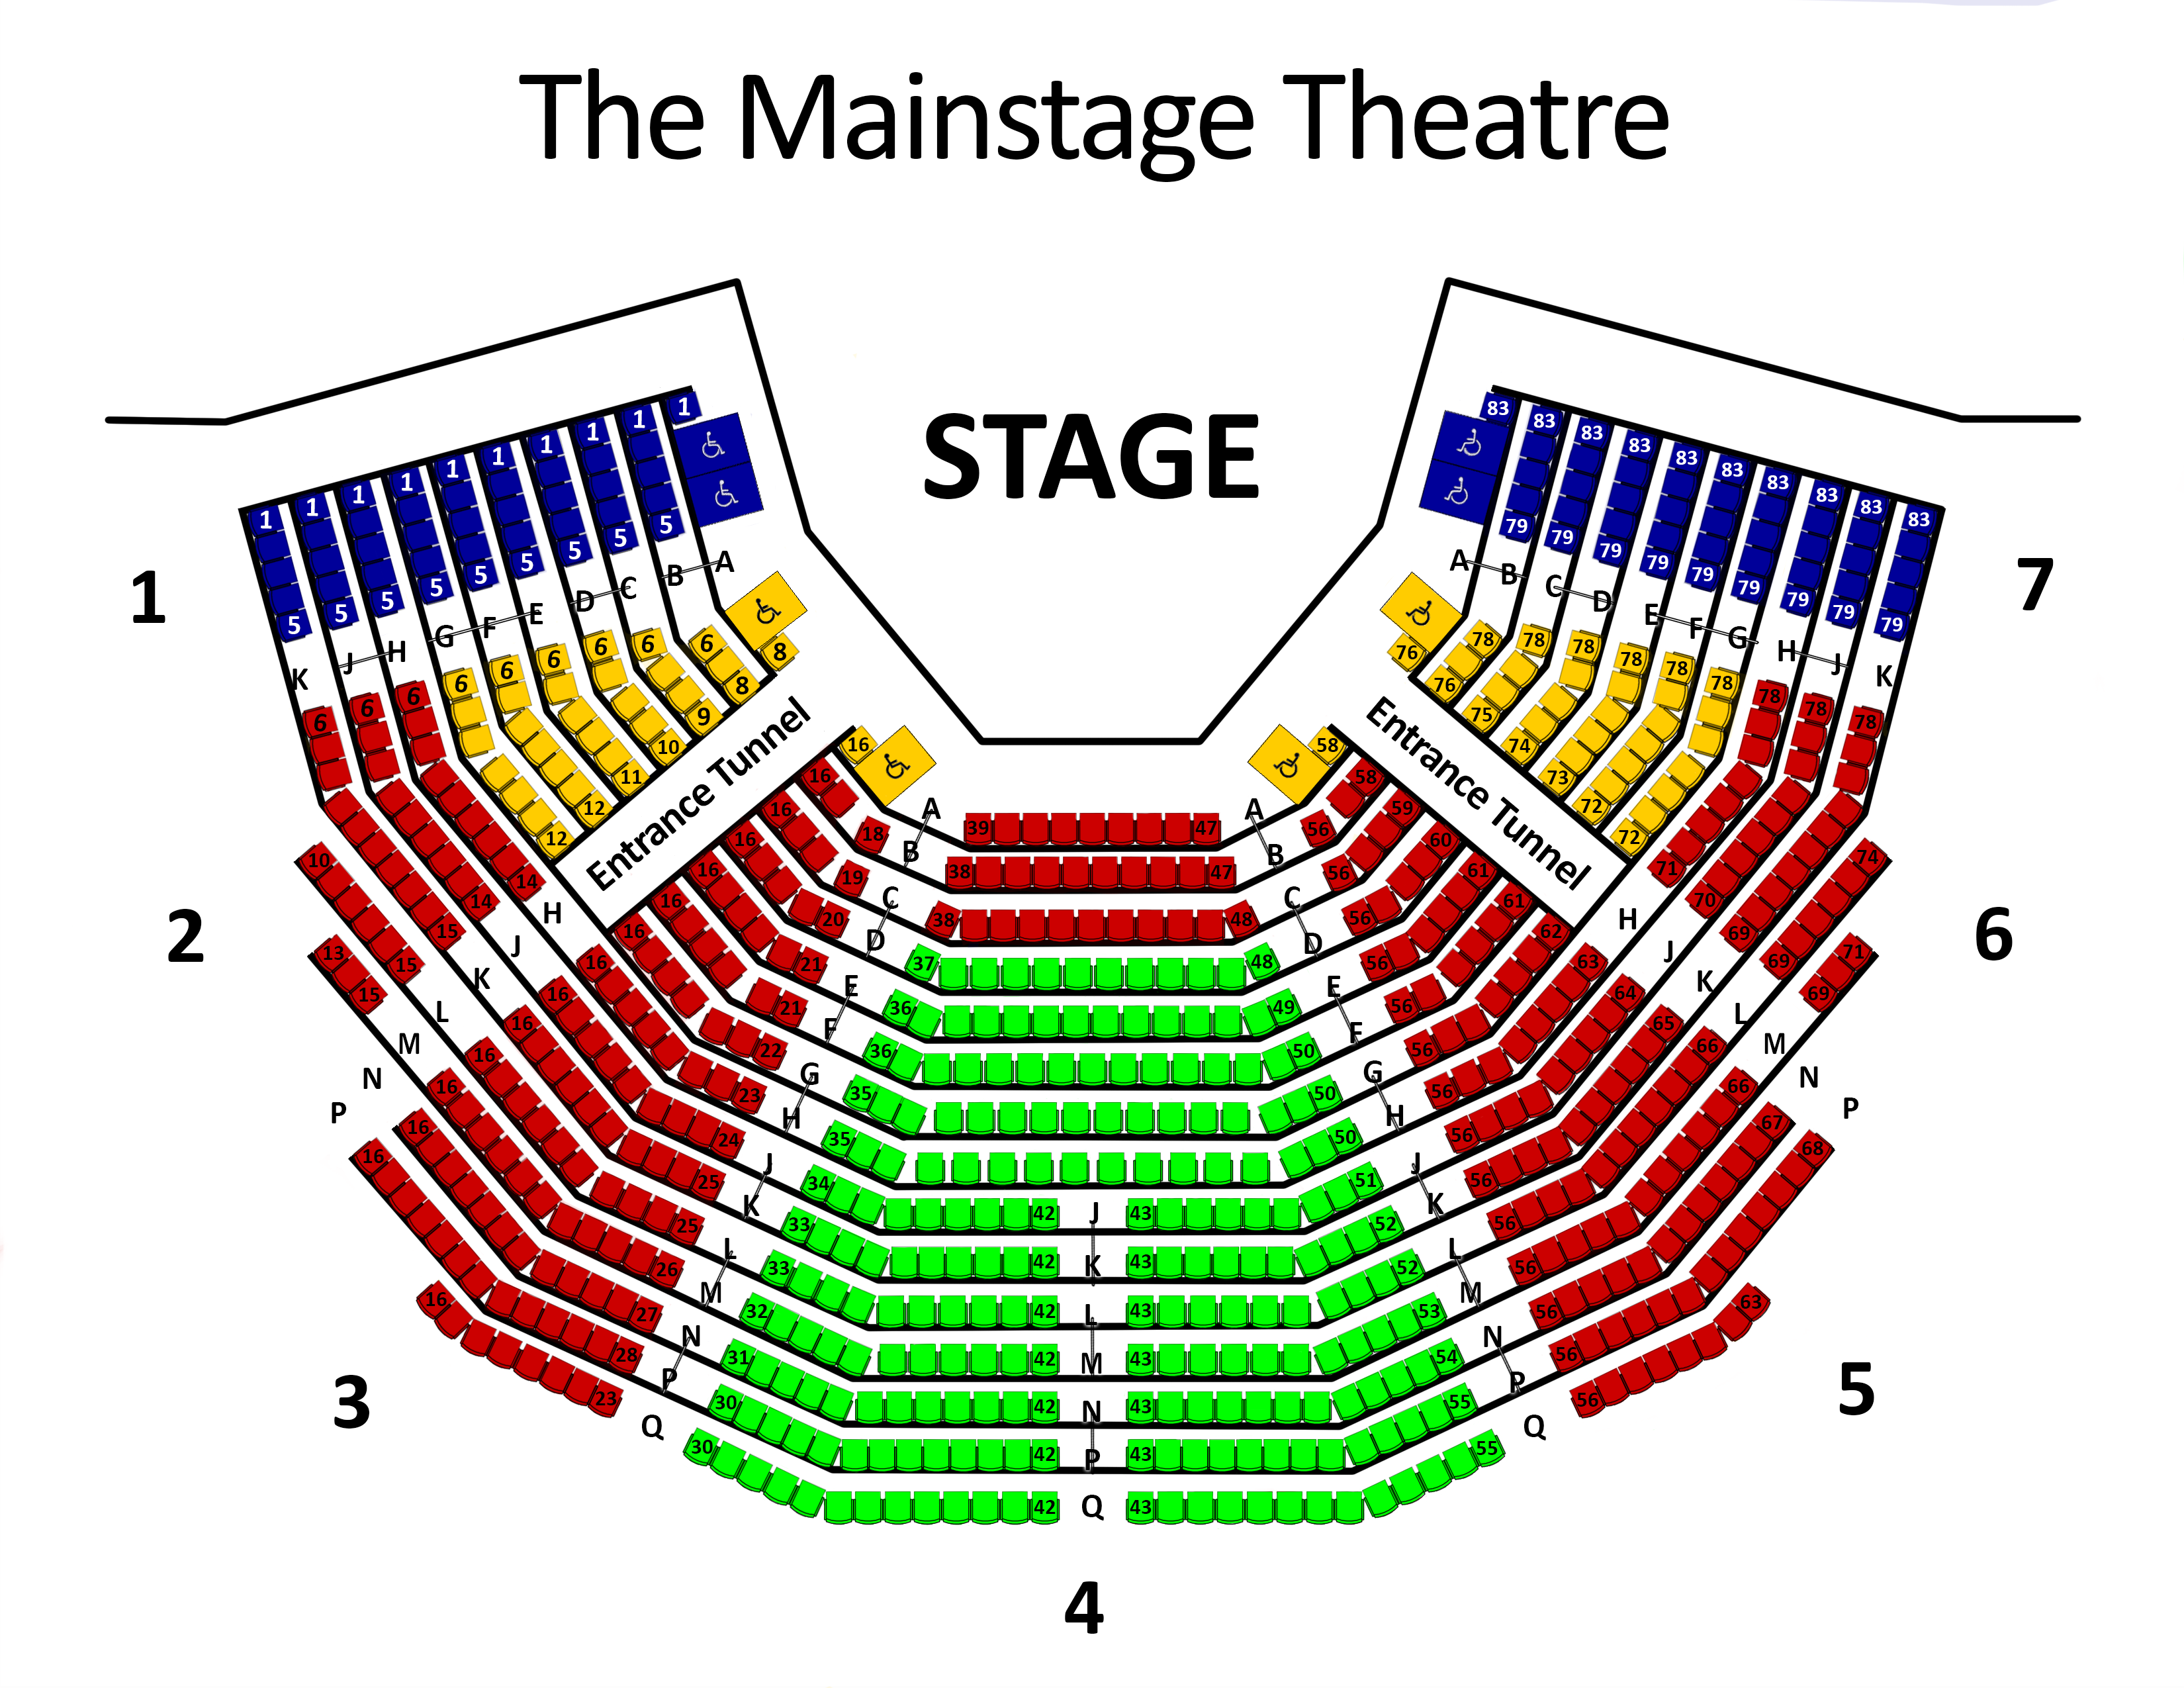 BMO Mainstage Seating Zones visually represented by colour coding